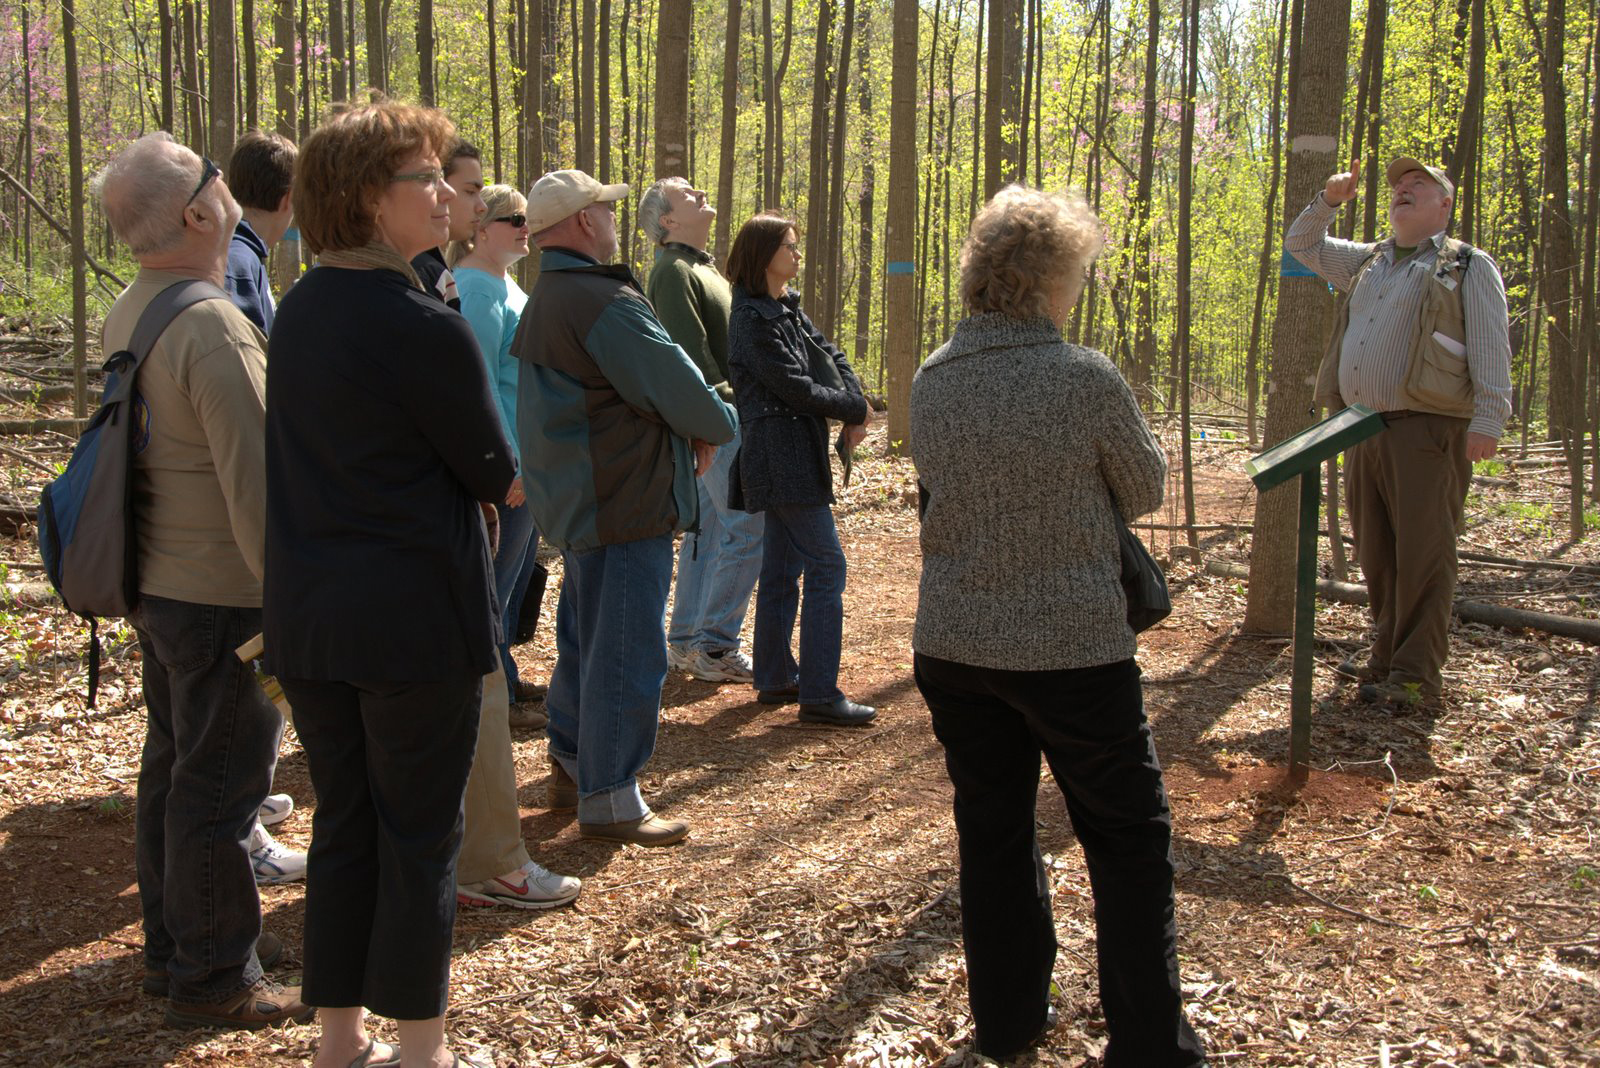 A group of people standing next to an interpretive sign in the woods.